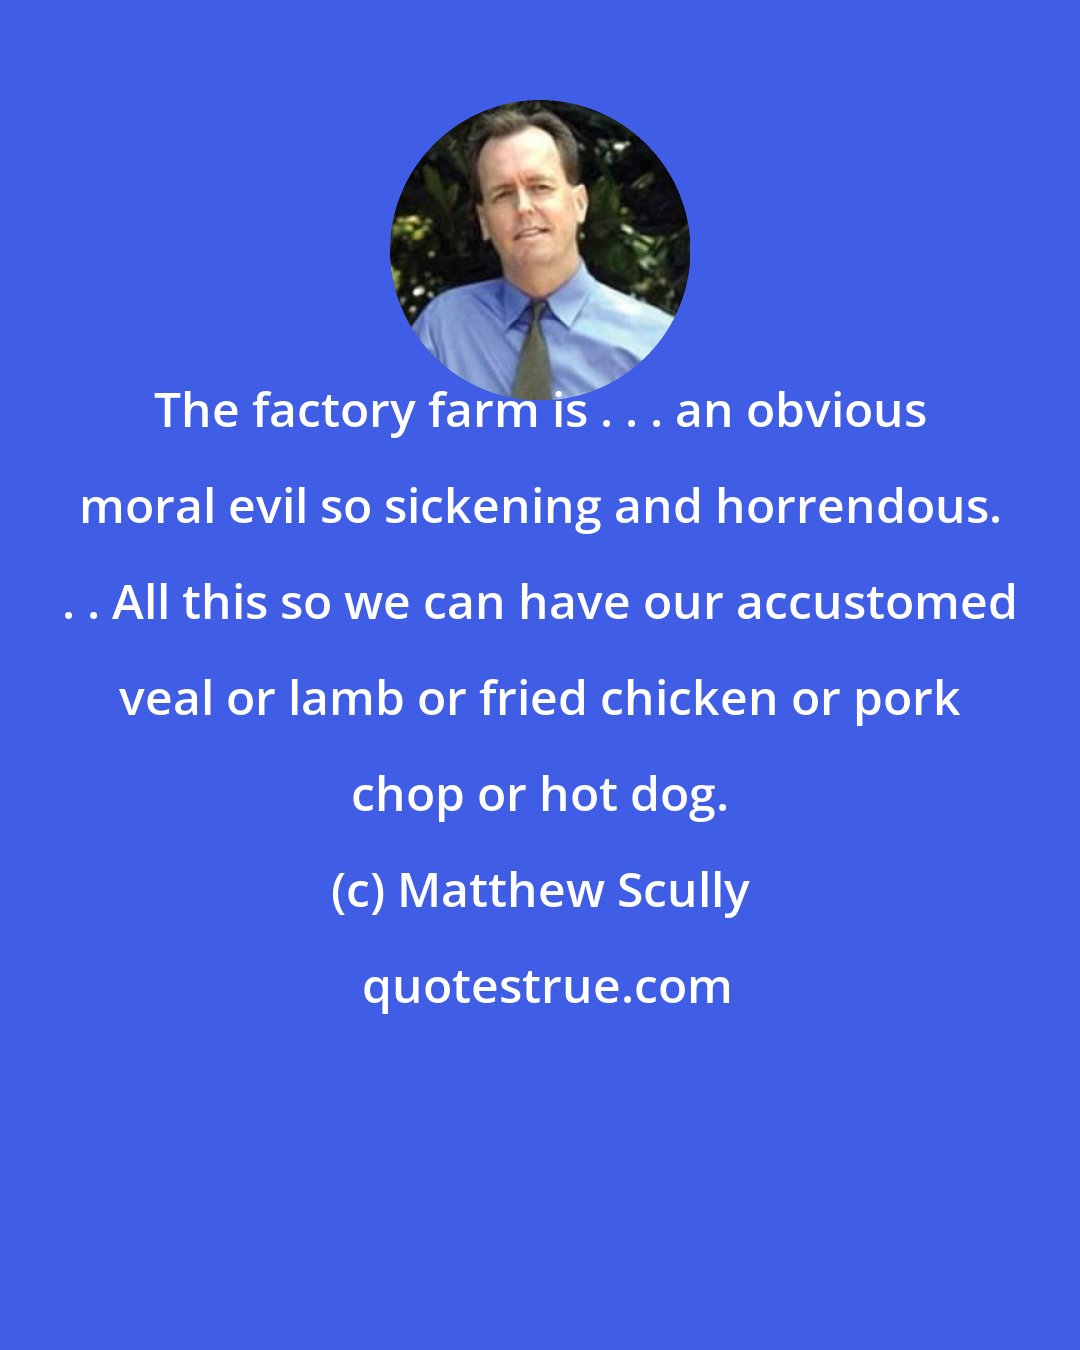 Matthew Scully: The factory farm is . . . an obvious moral evil so sickening and horrendous. . . All this so we can have our accustomed veal or lamb or fried chicken or pork chop or hot dog.